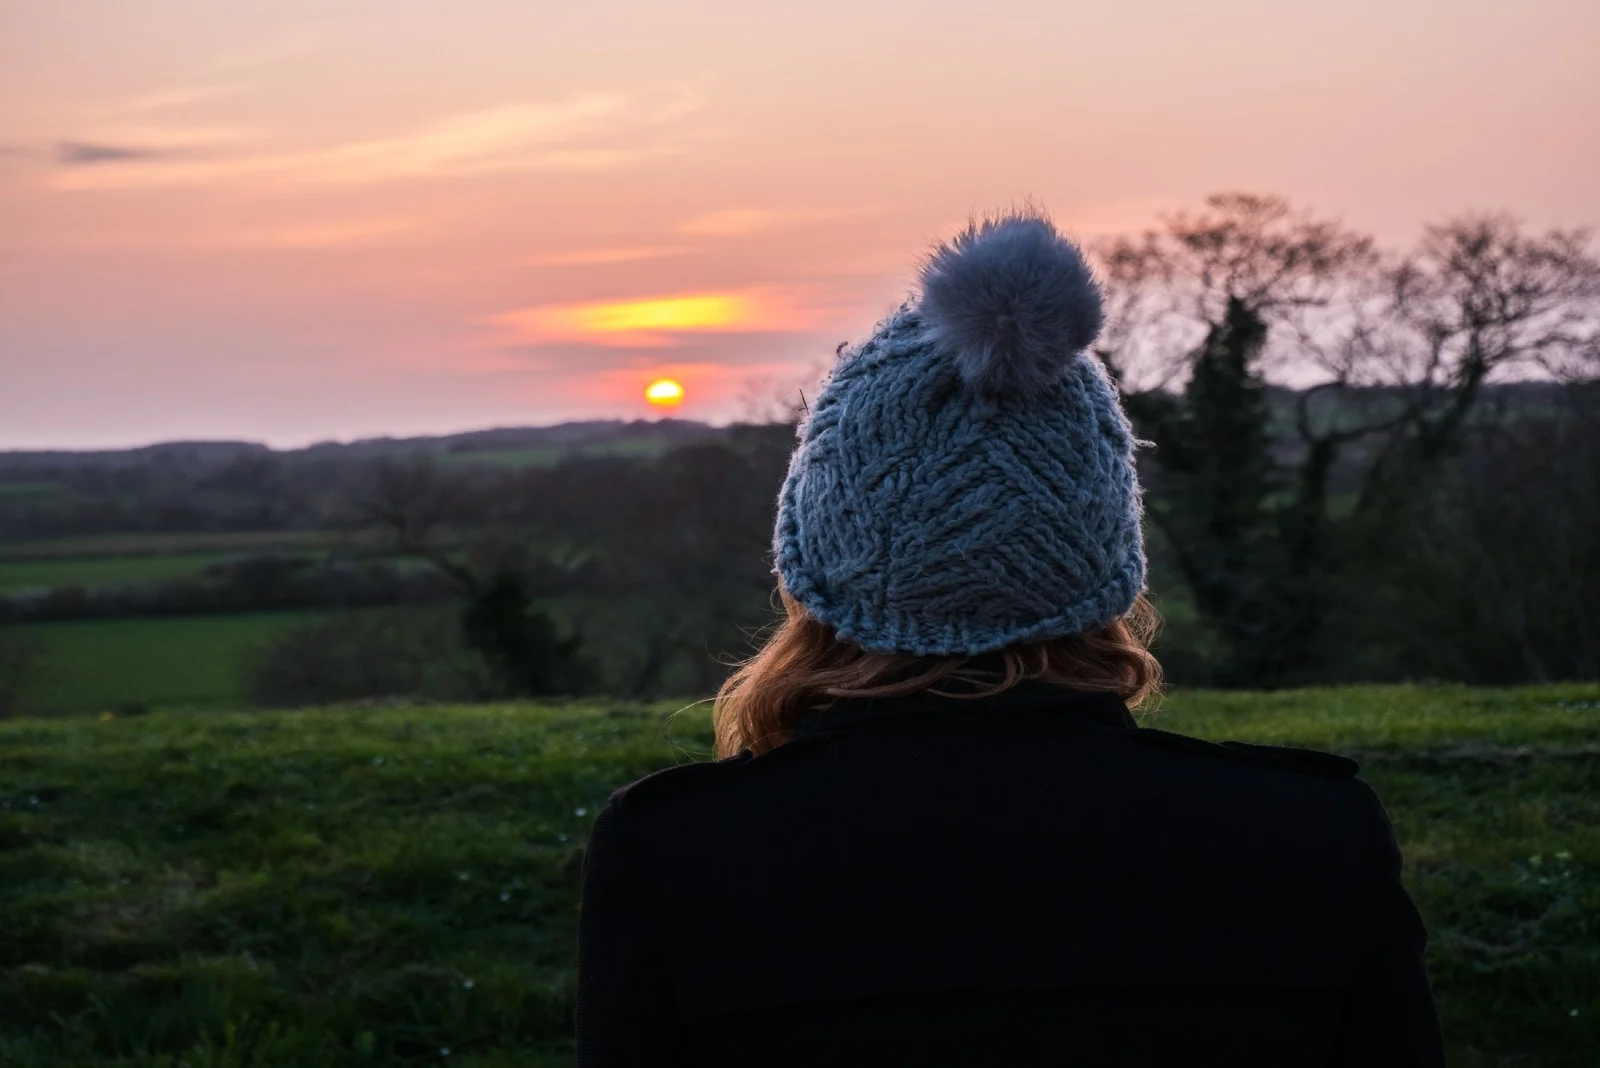 woman in blue knit cap looking at sunset